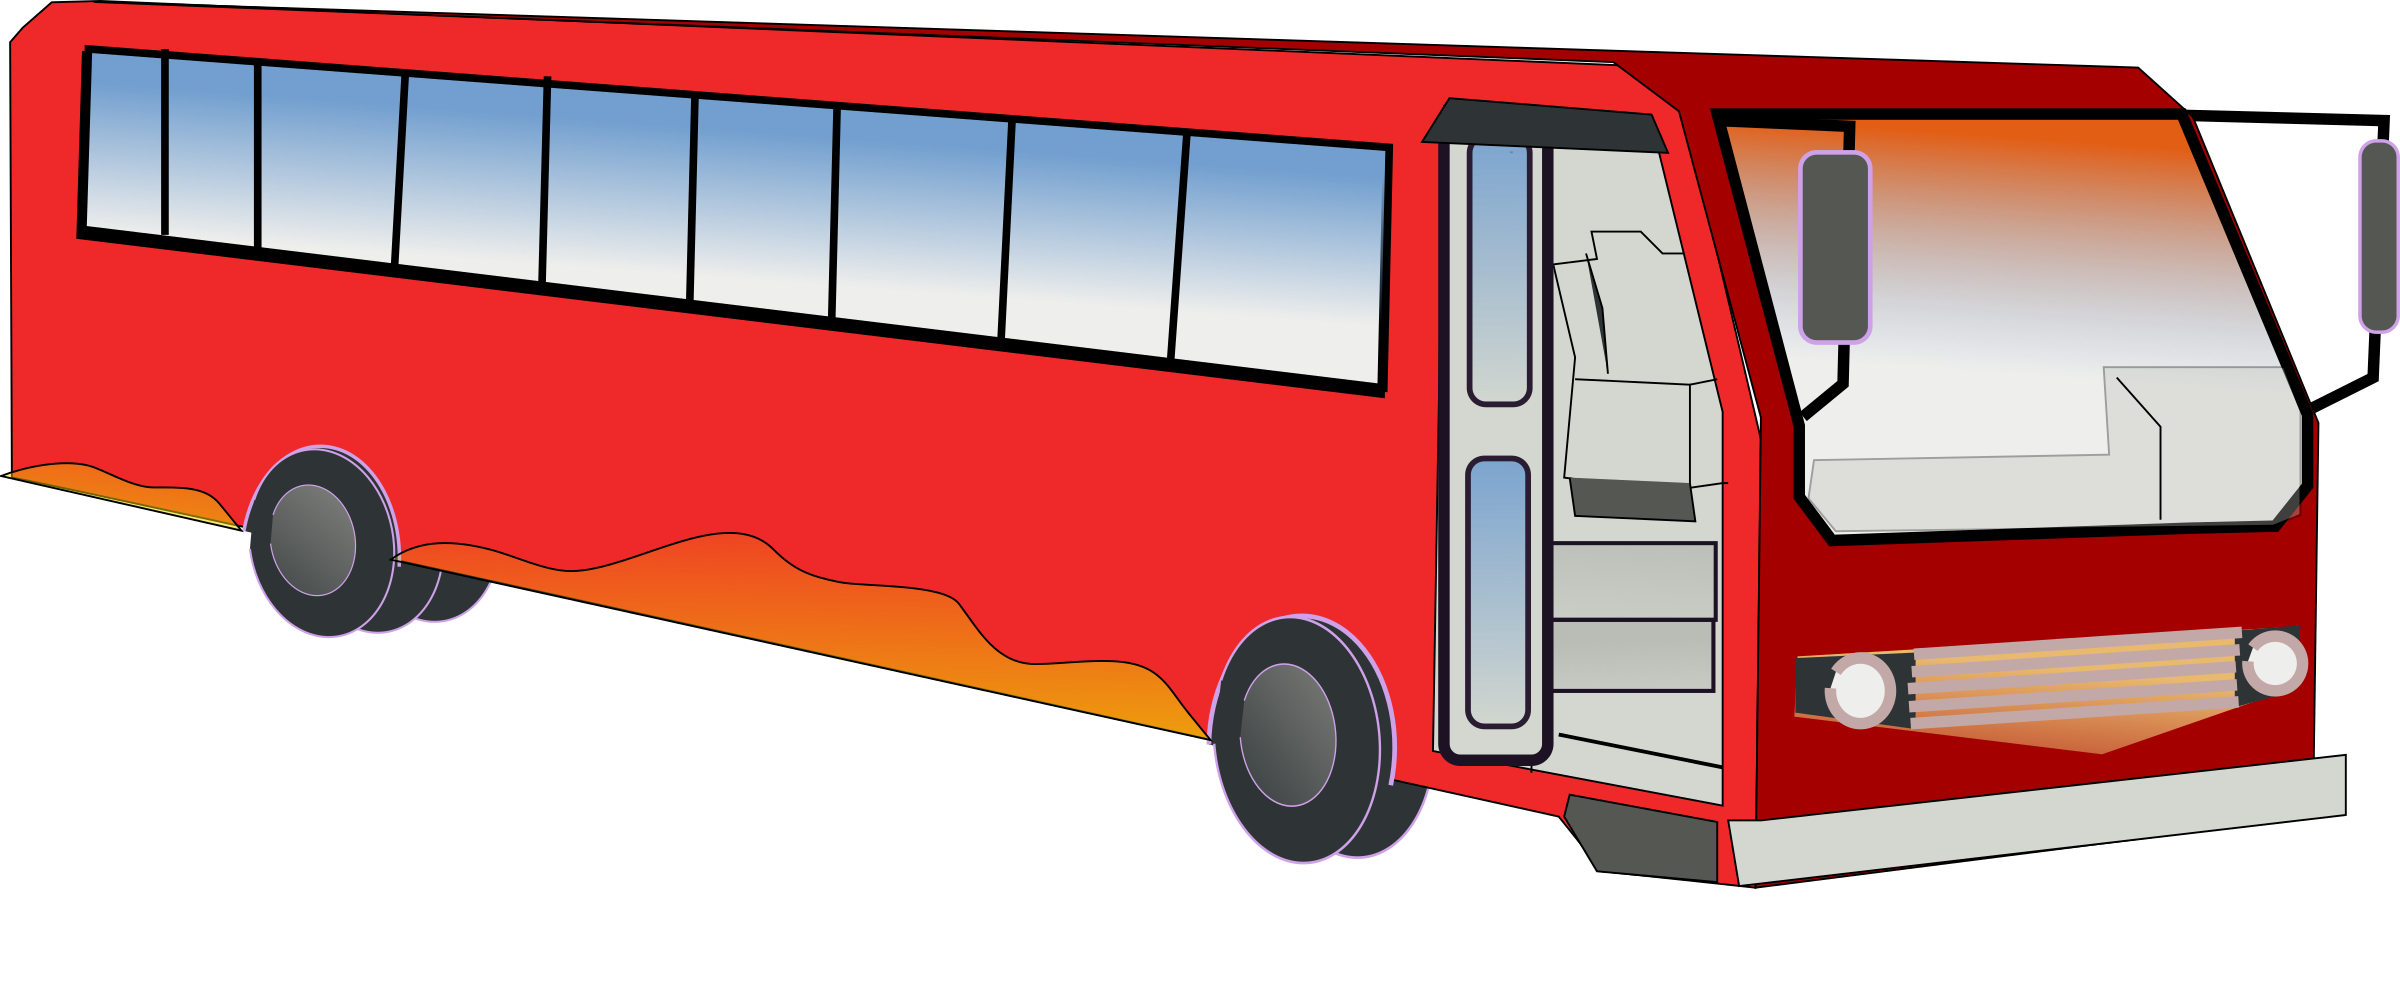 clipart picture of a bus - photo #33